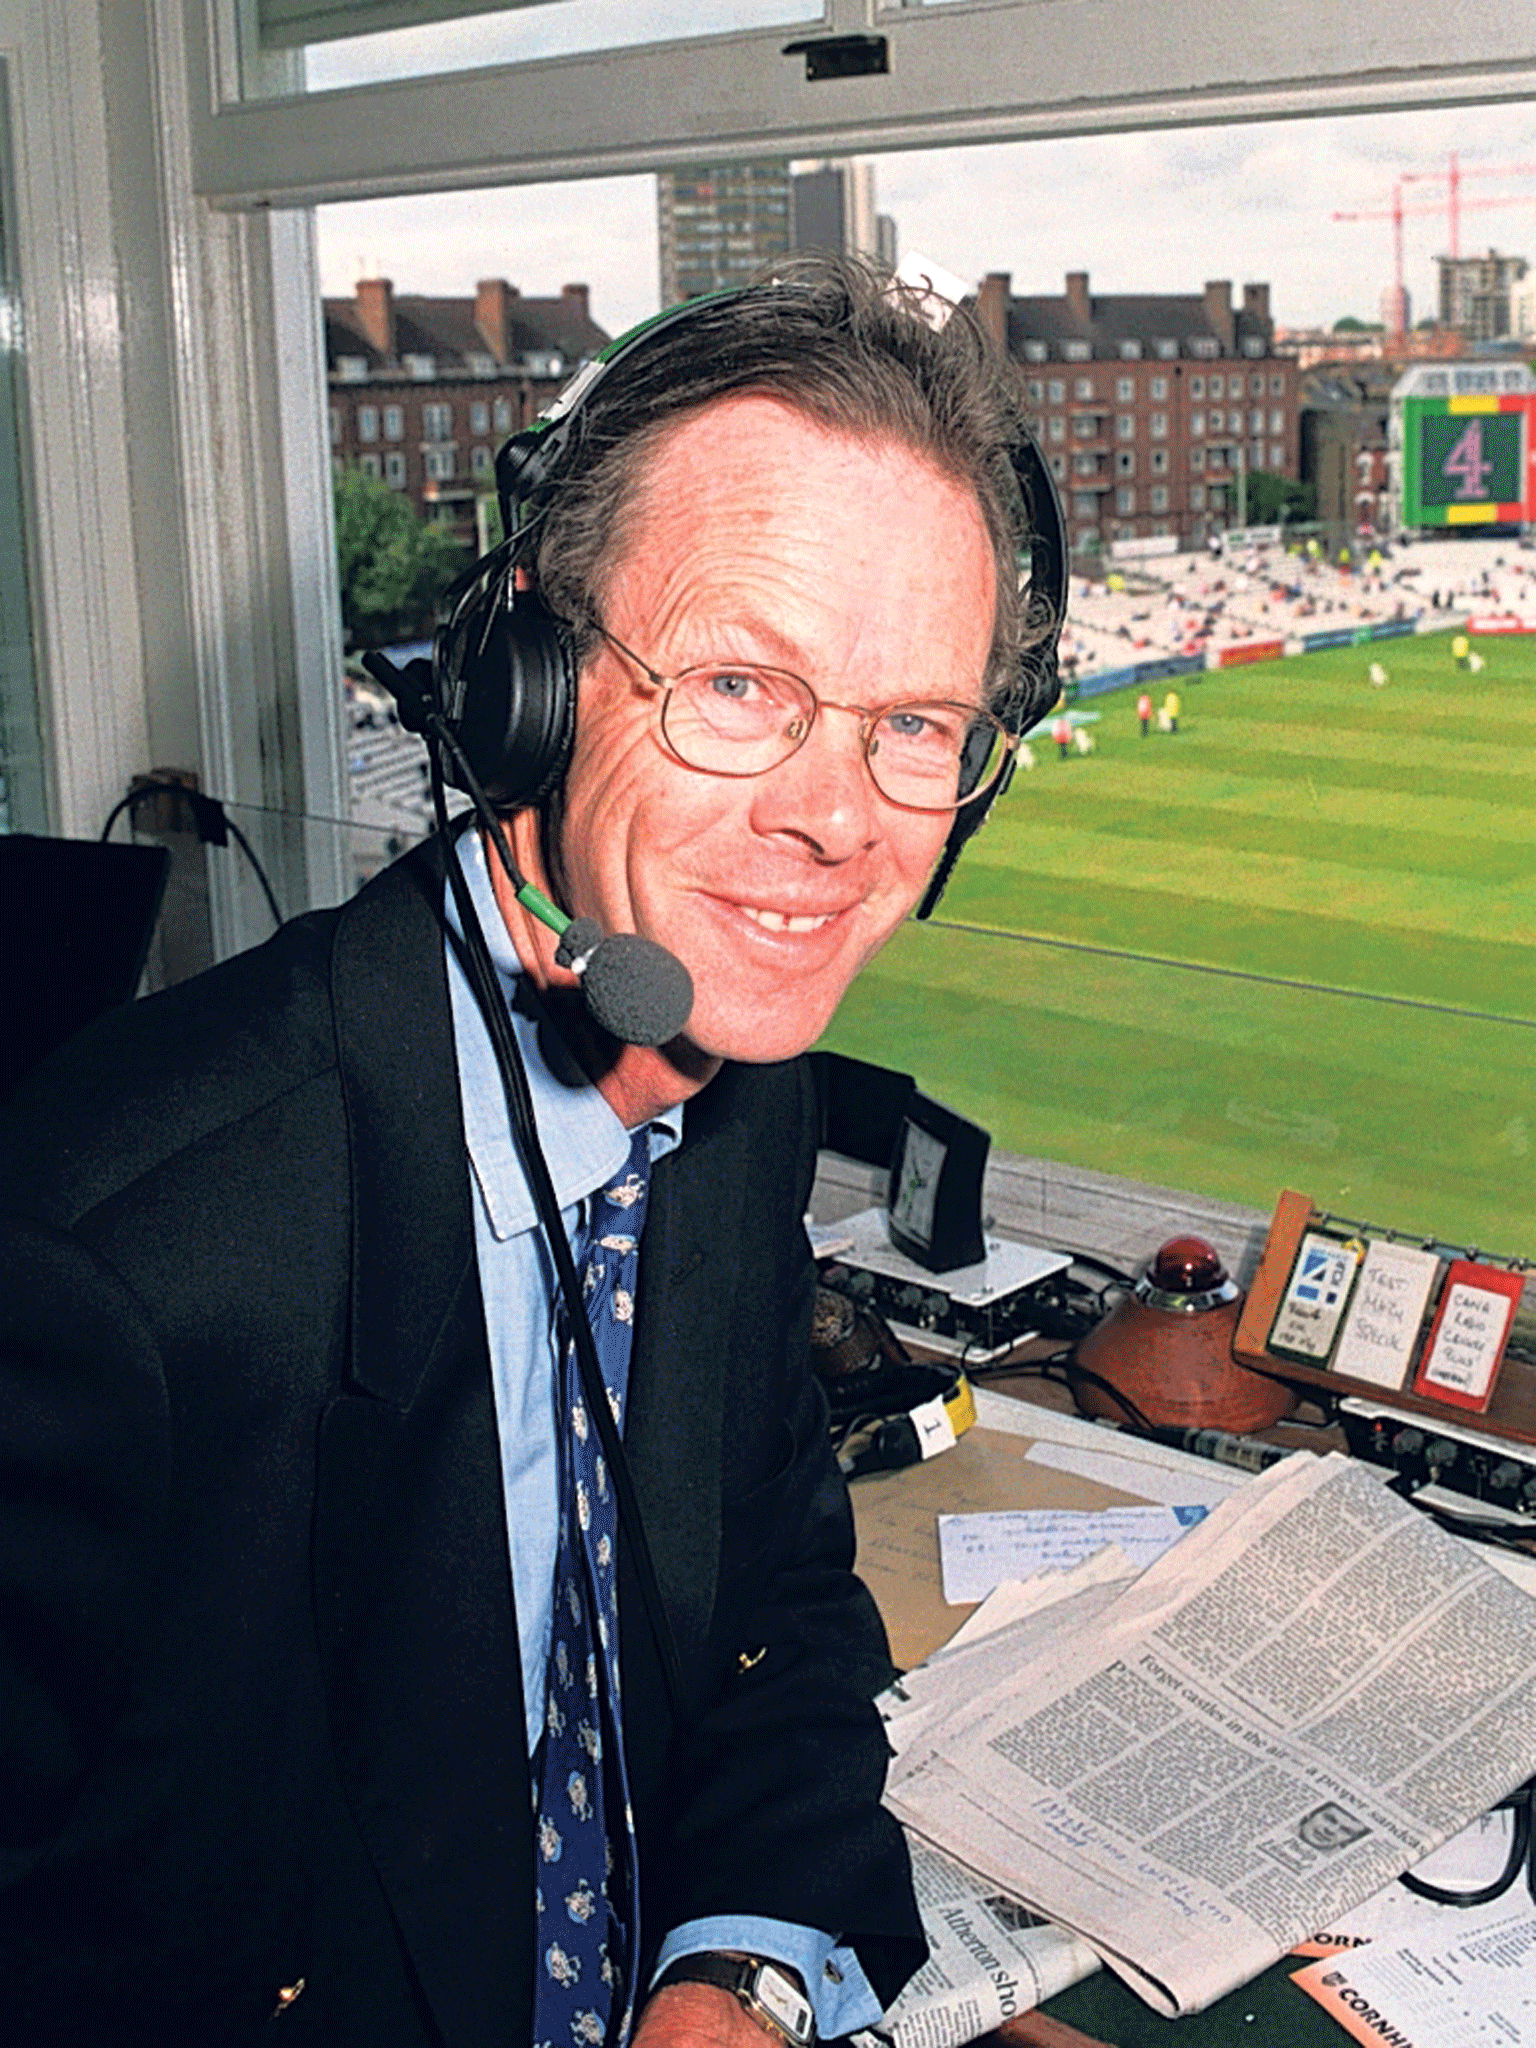 Martin-Jenkins was known as 'The Major' in the press box